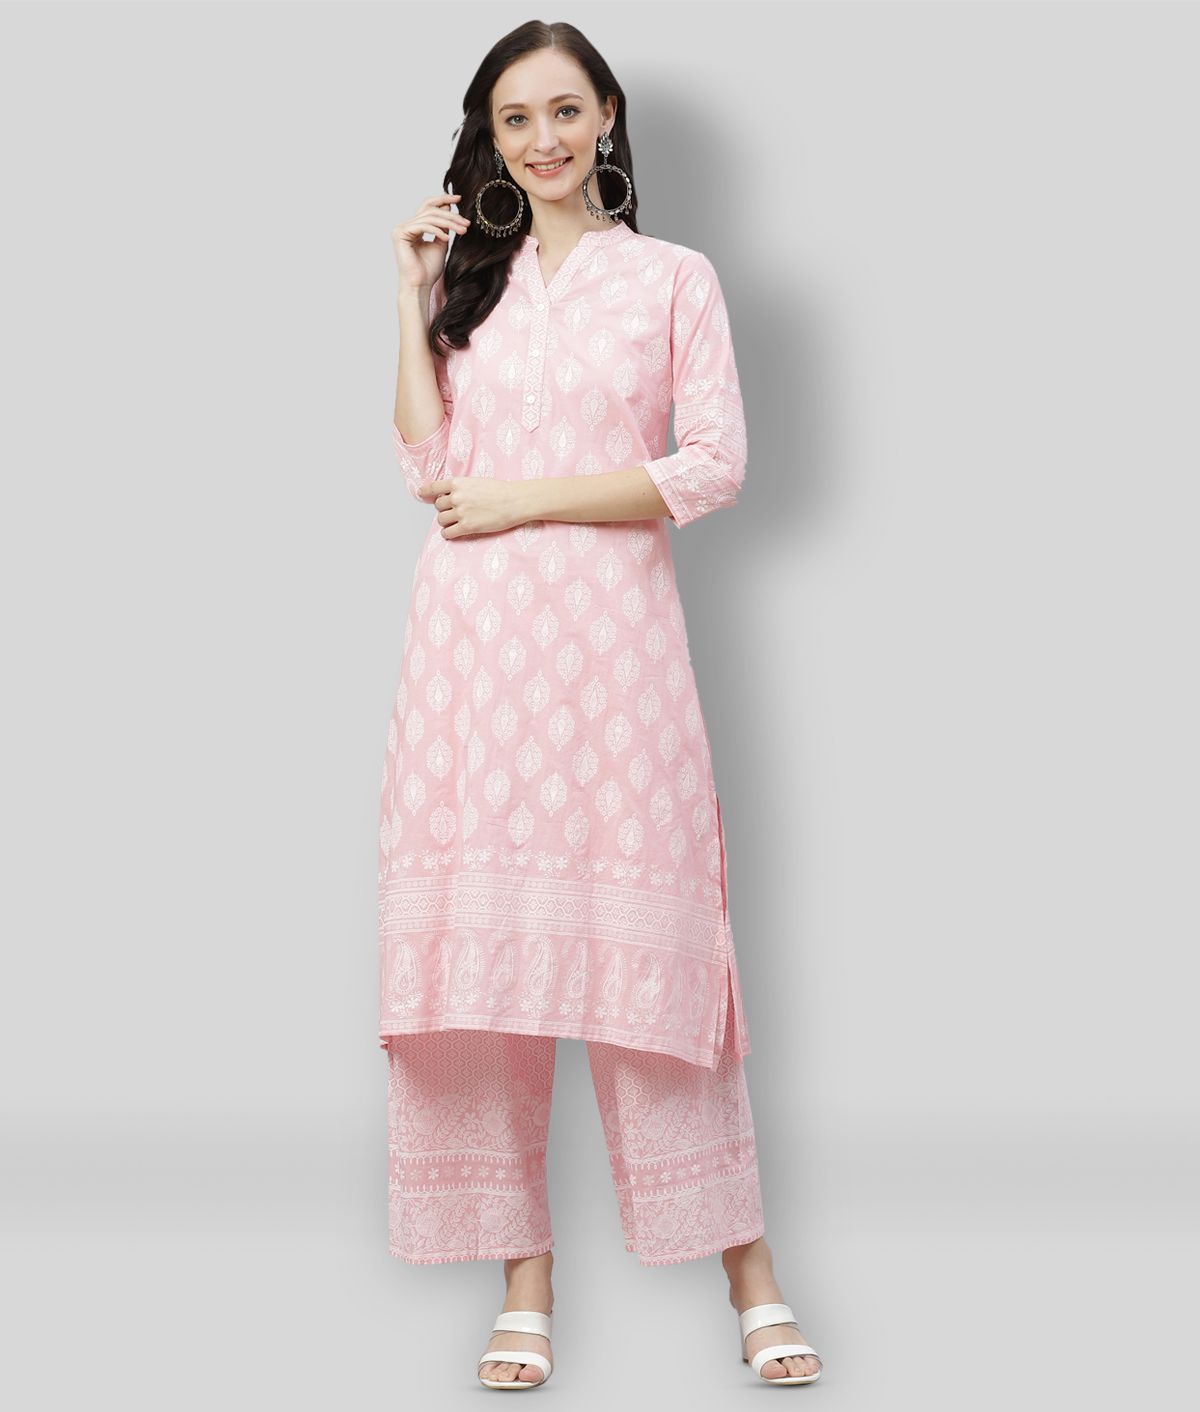     			Divena - Pink Straight Cotton Women's Stitched Salwar Suit ( Pack of 1 )